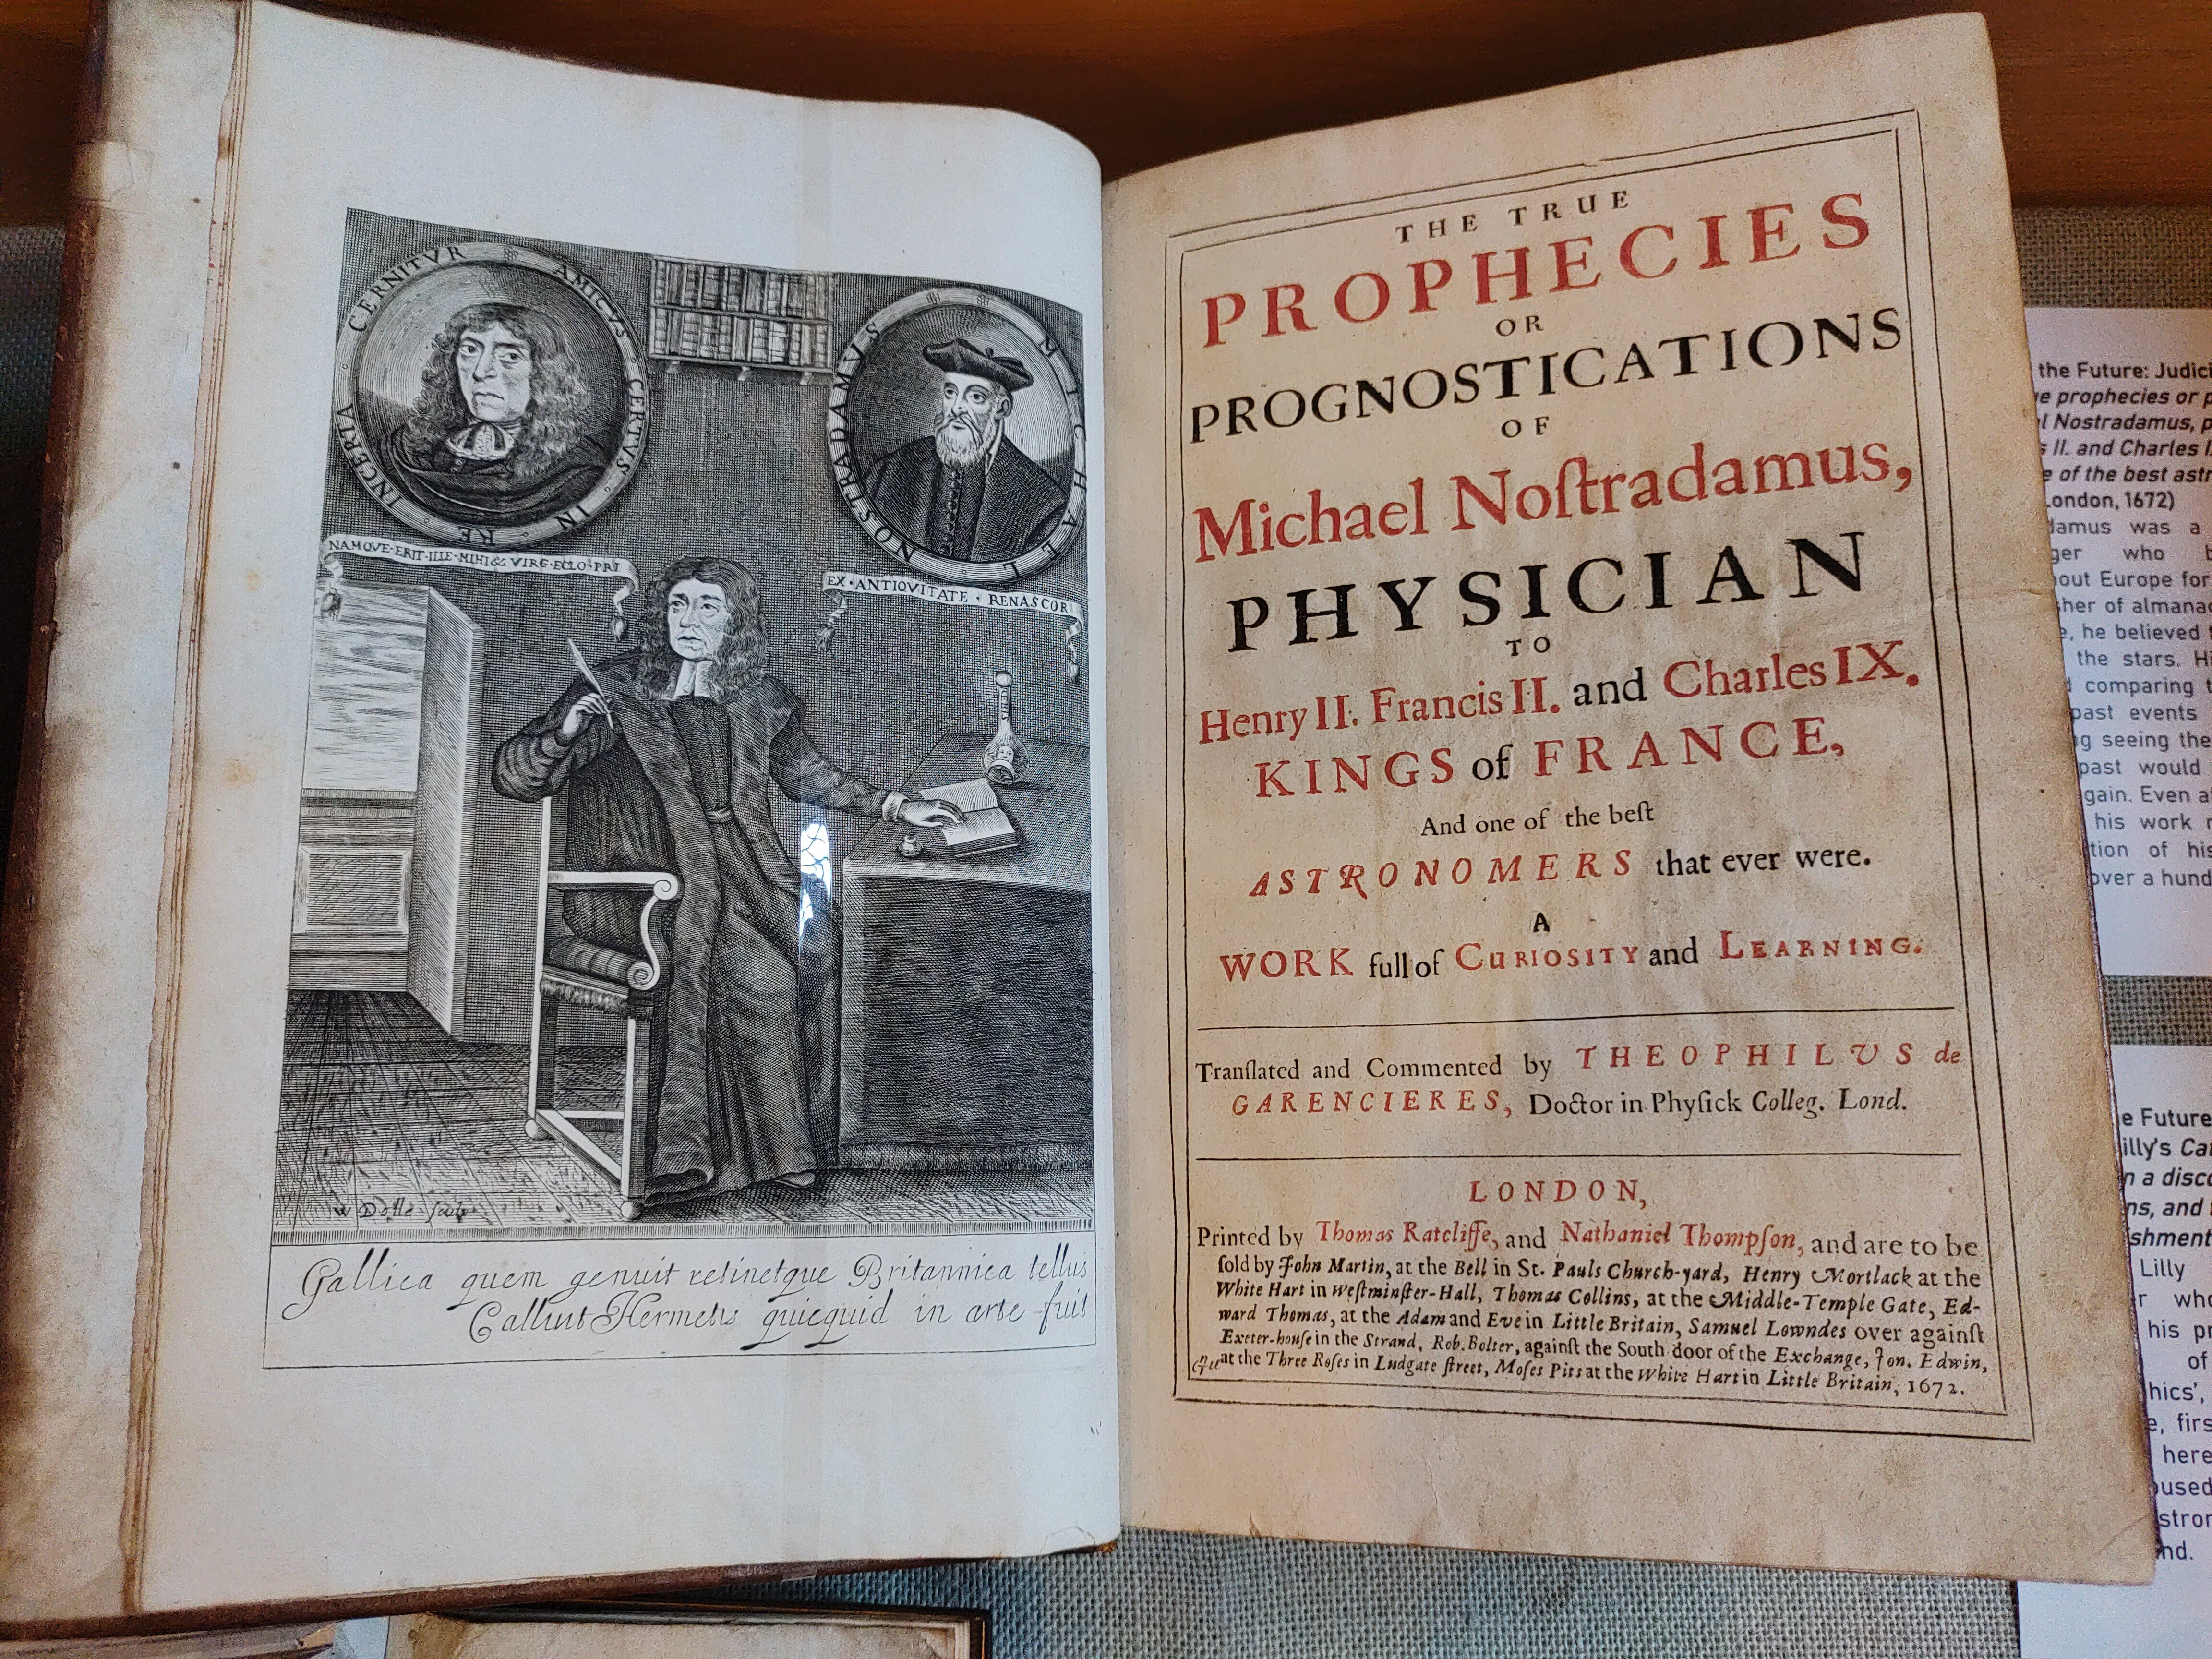 The true prophecies or prognostications of Michael Nostradamus, physician to Henry II. Francis II. and Charles IX. Kings of France, and one of the best astronomers that ever were (London, 1672)